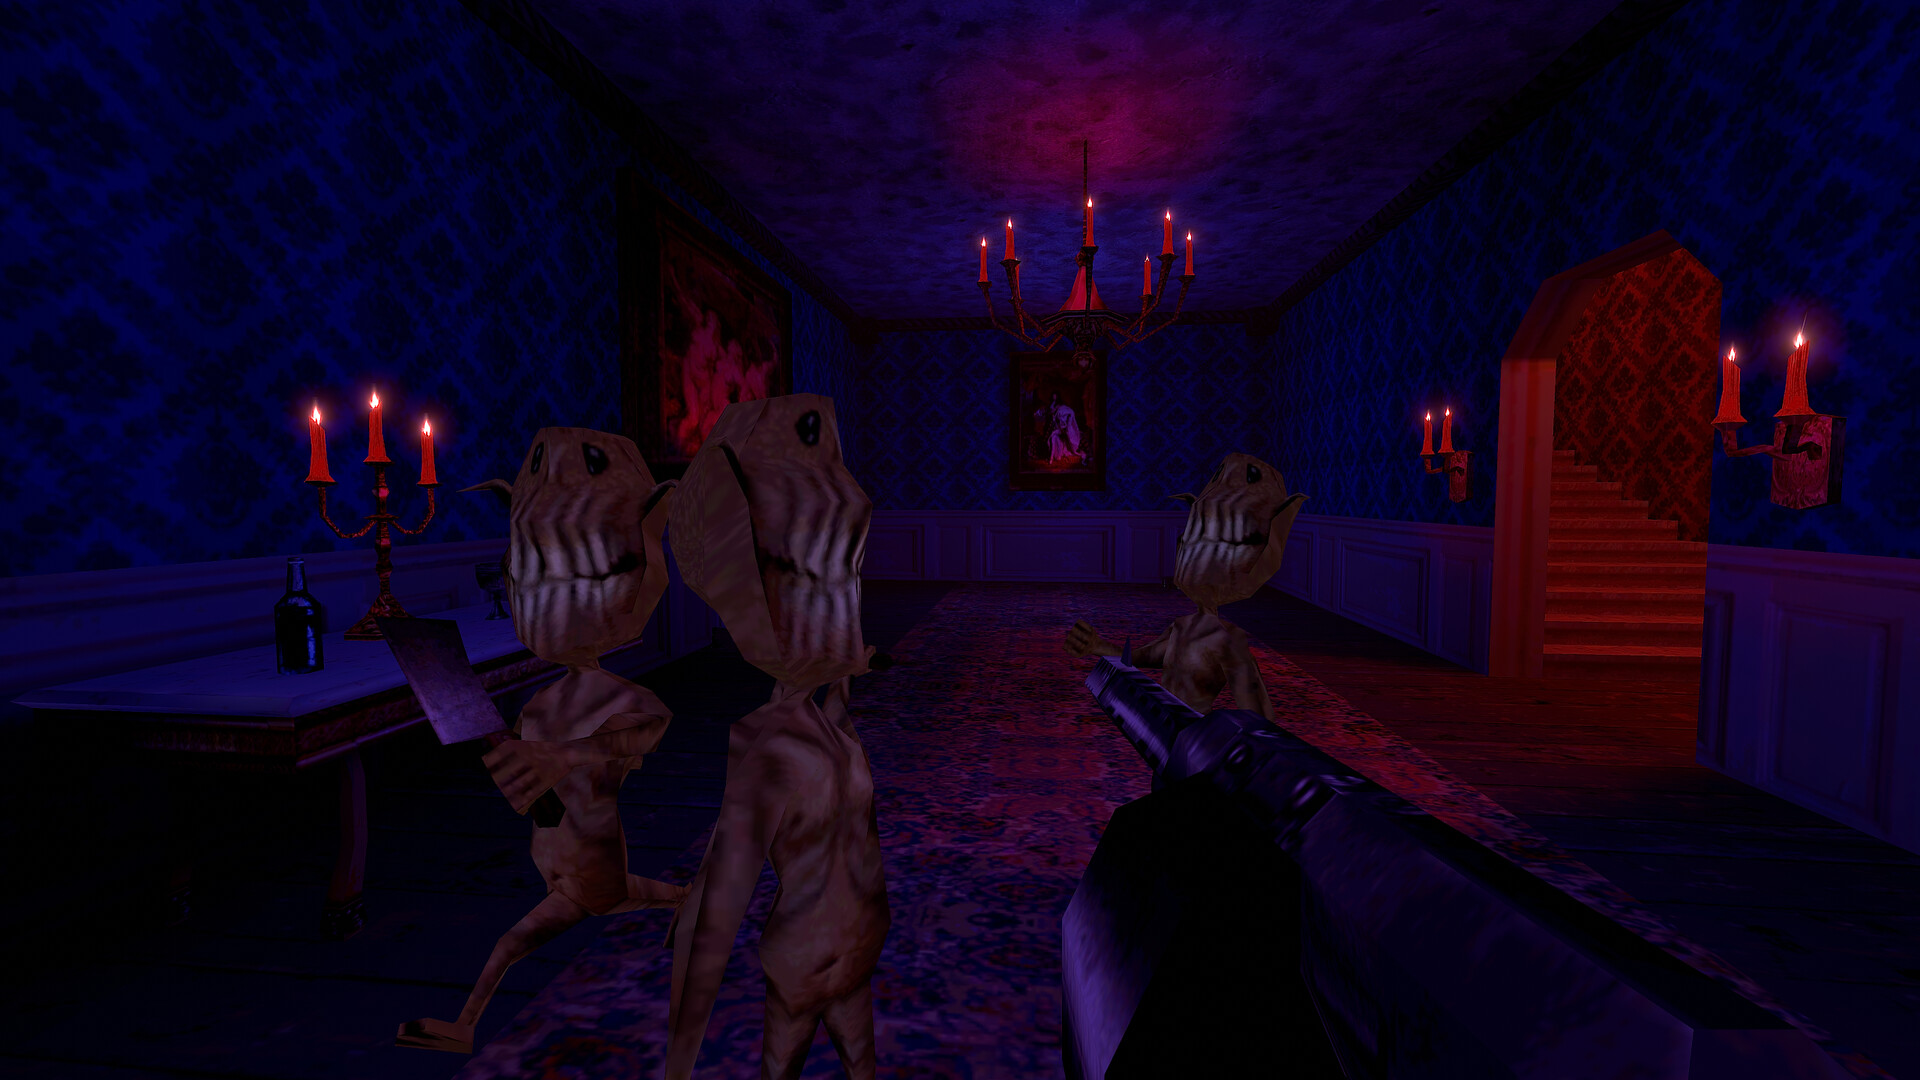 player facing a group of goblins in a darkened, purple interior